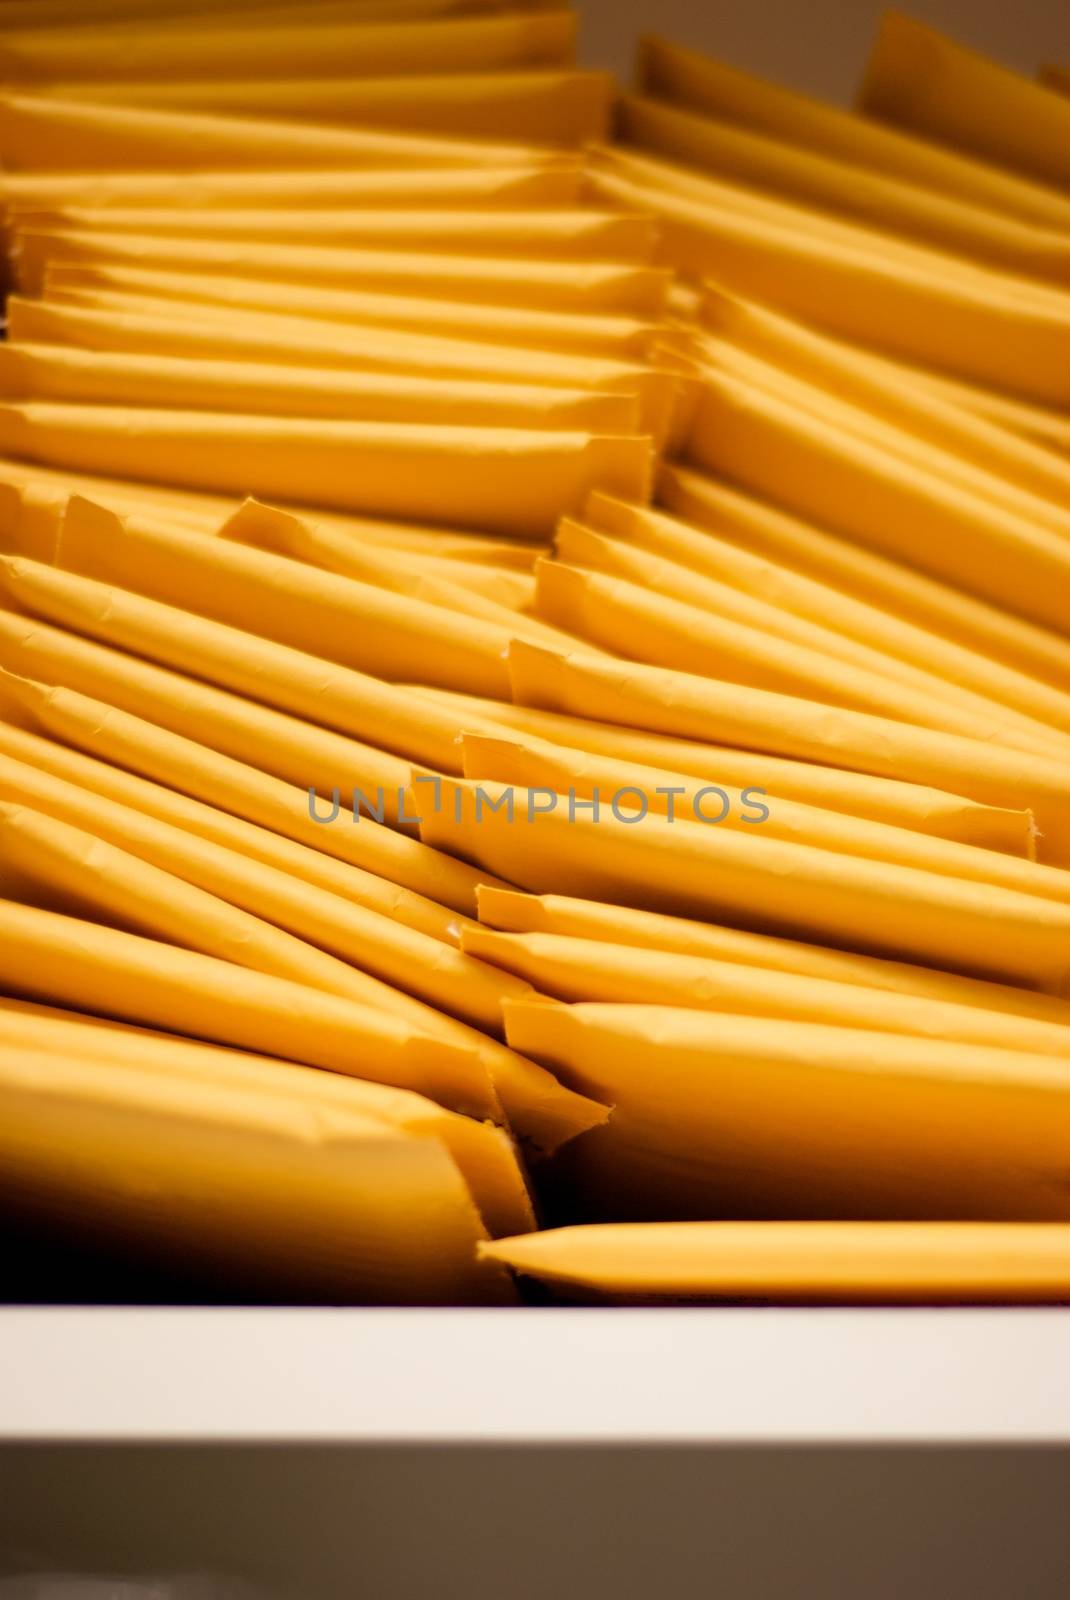 Vertical Pile of Padded Shipping Envelopes by pixelsnap